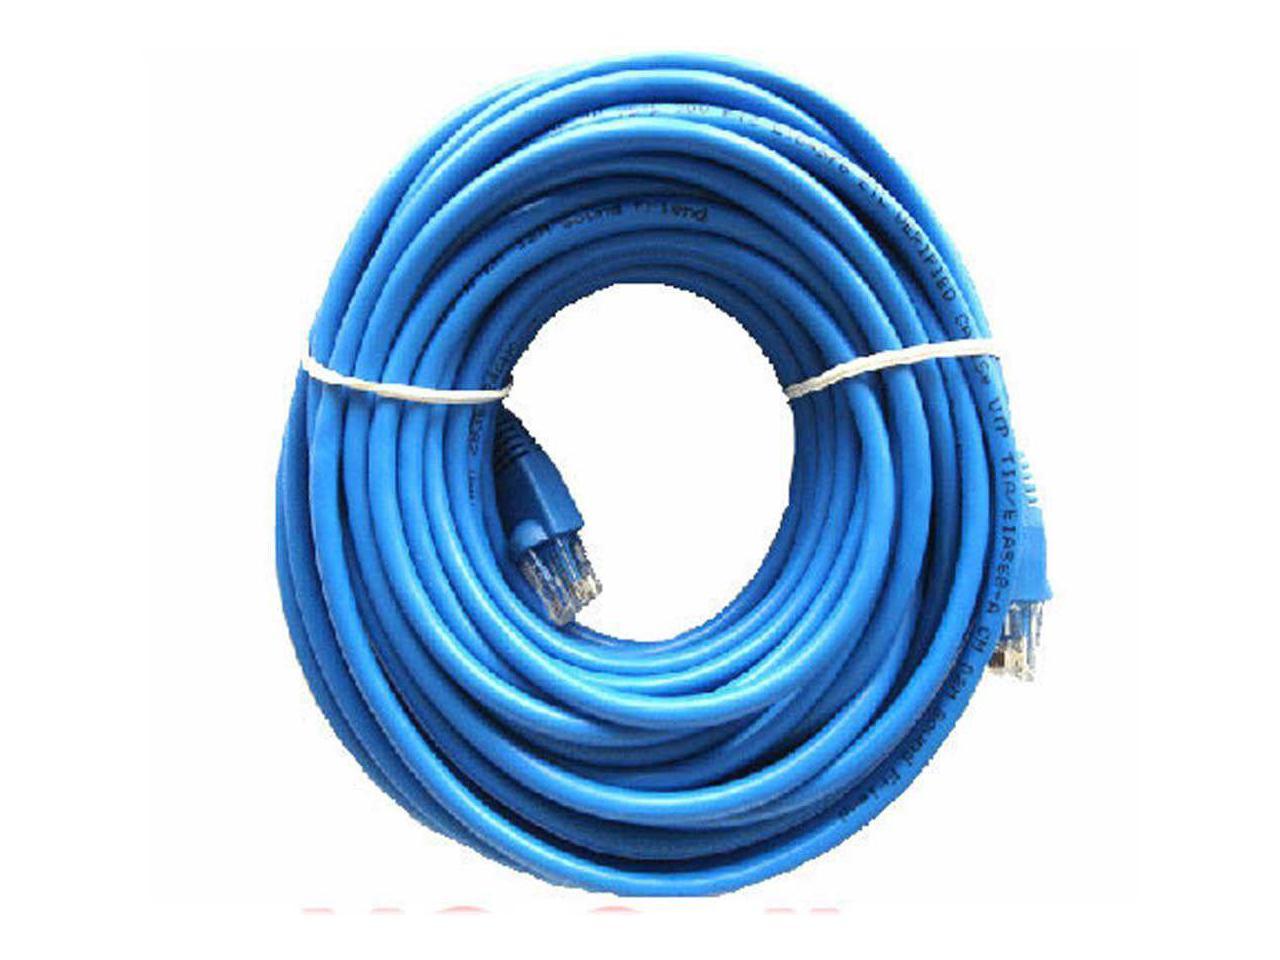 ANiceS 100FT 100 FT RJ45 CAT6 CAT 6 High Speed Ethernet LAN Network Black Patch Cable 